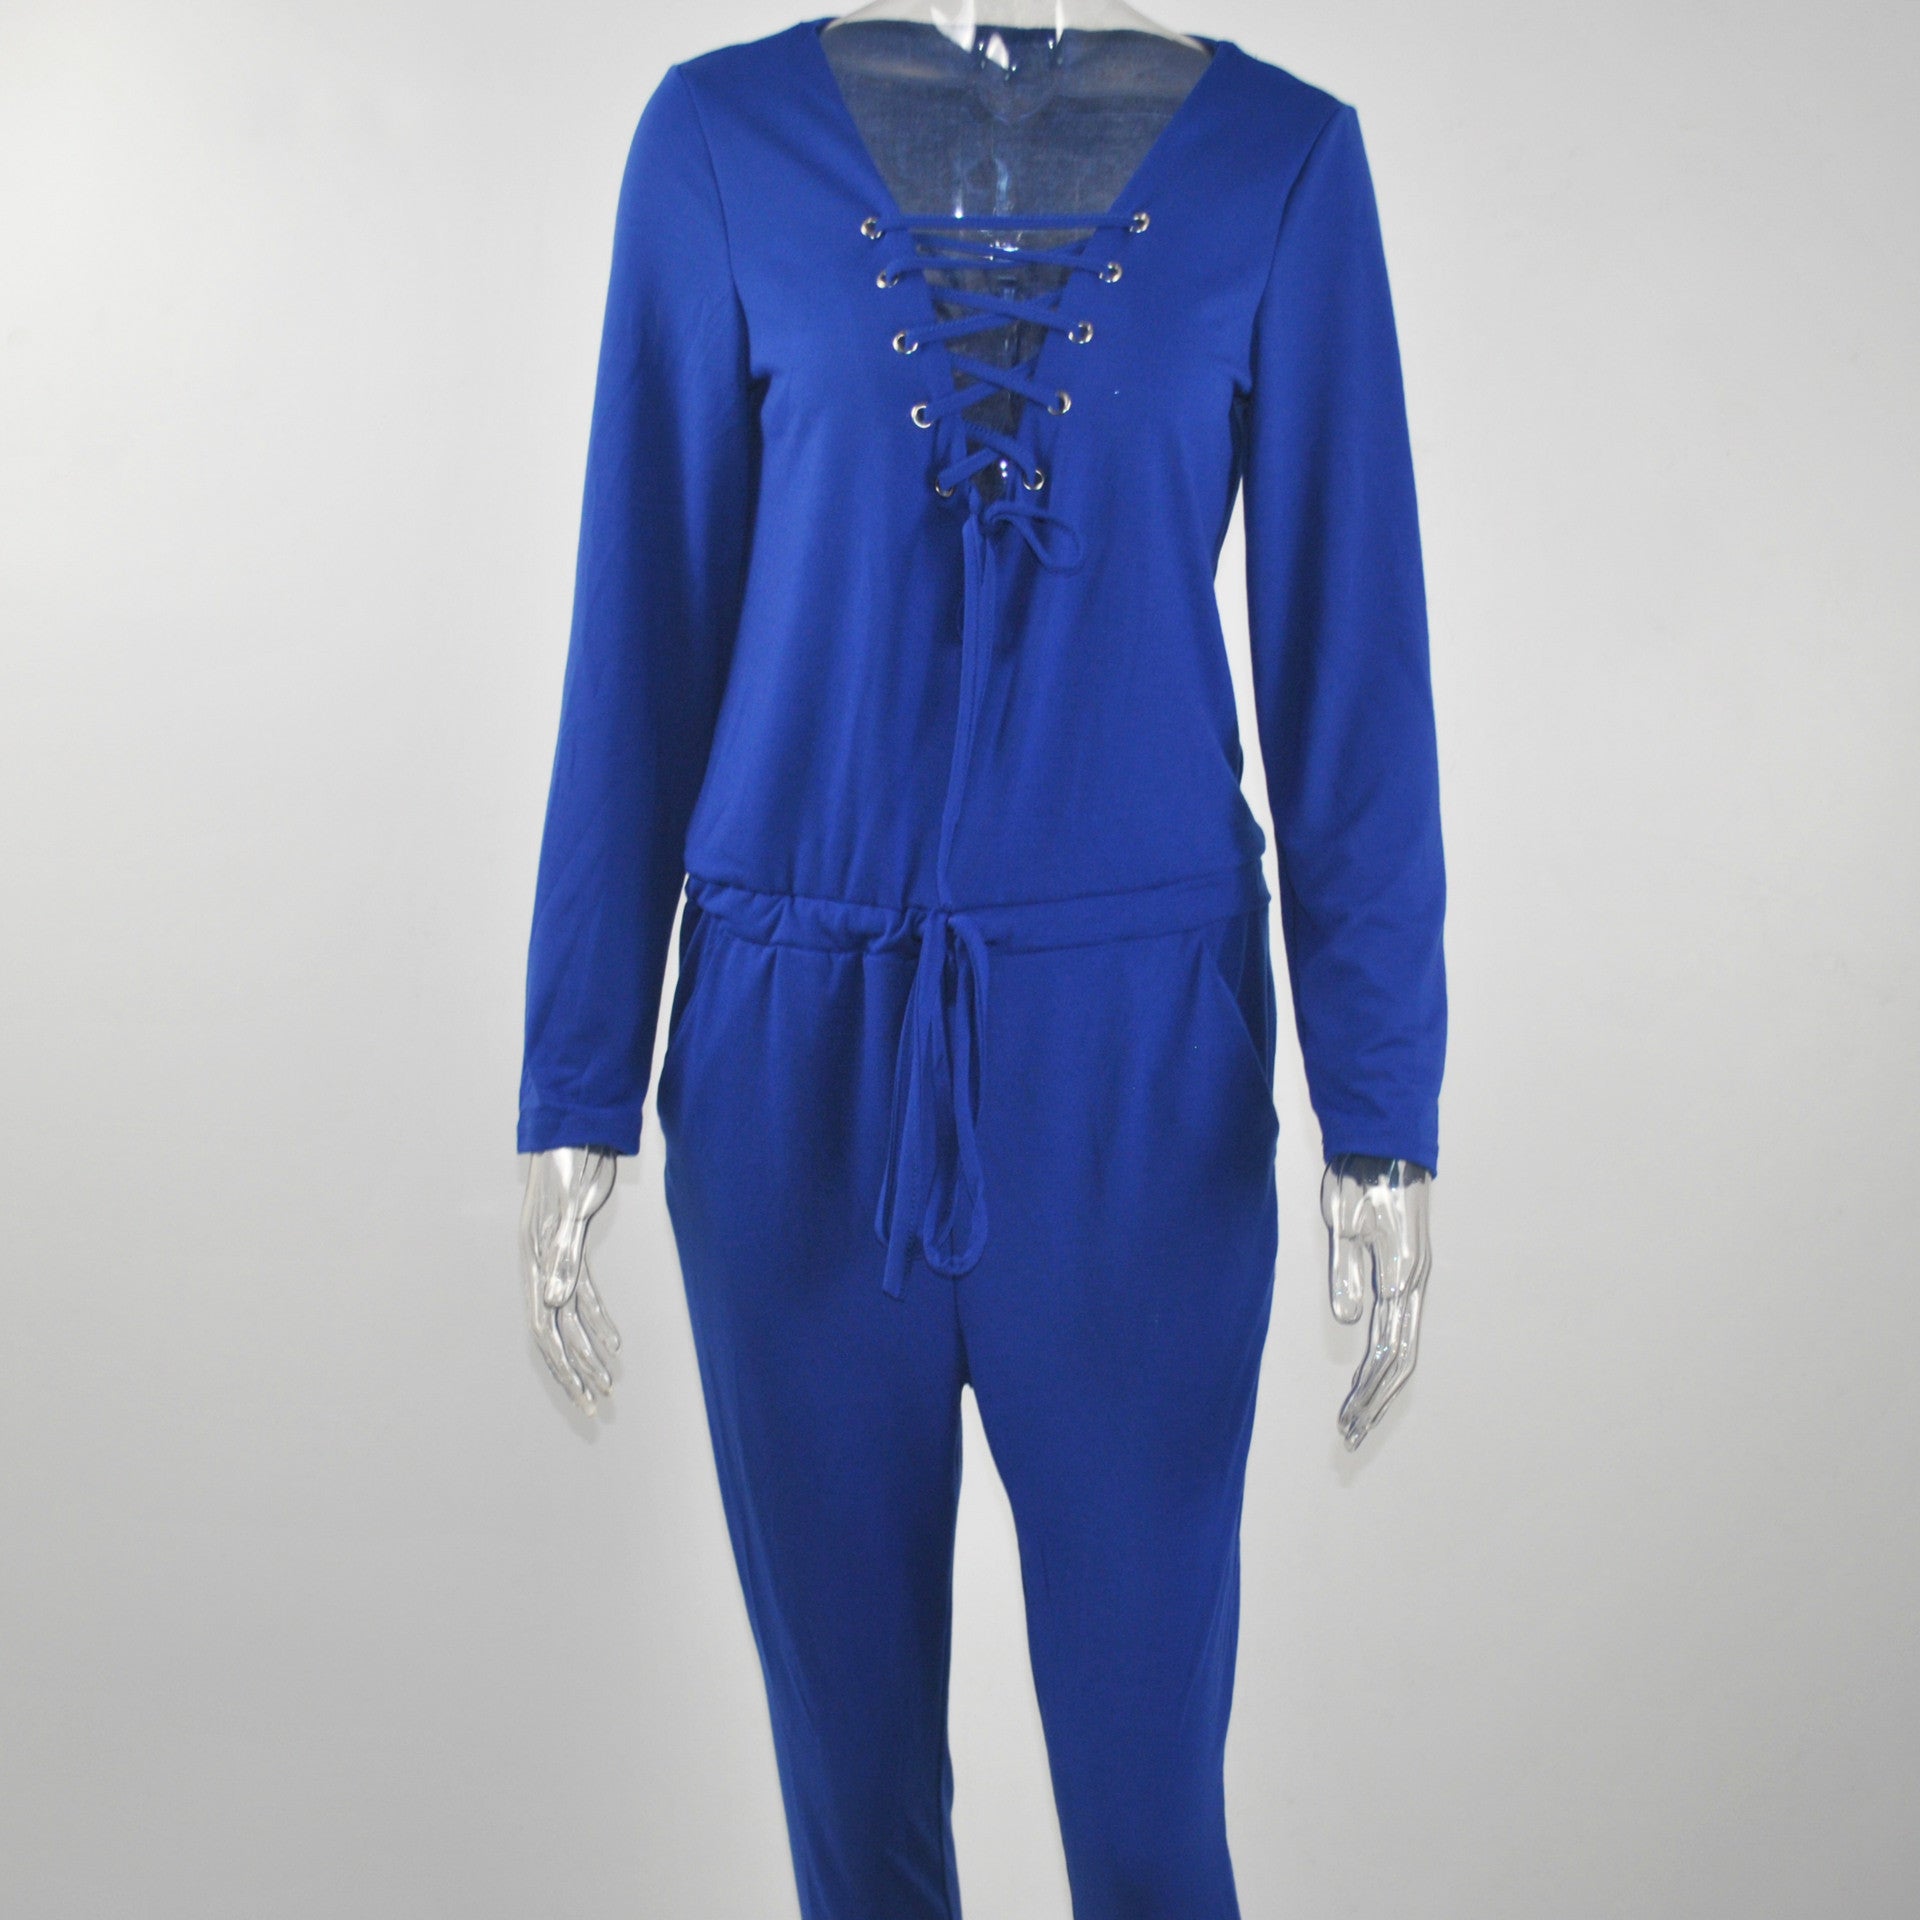 Long Sleeve Lace Up Deep V-neck Draw String Waist Long Jumpsuit